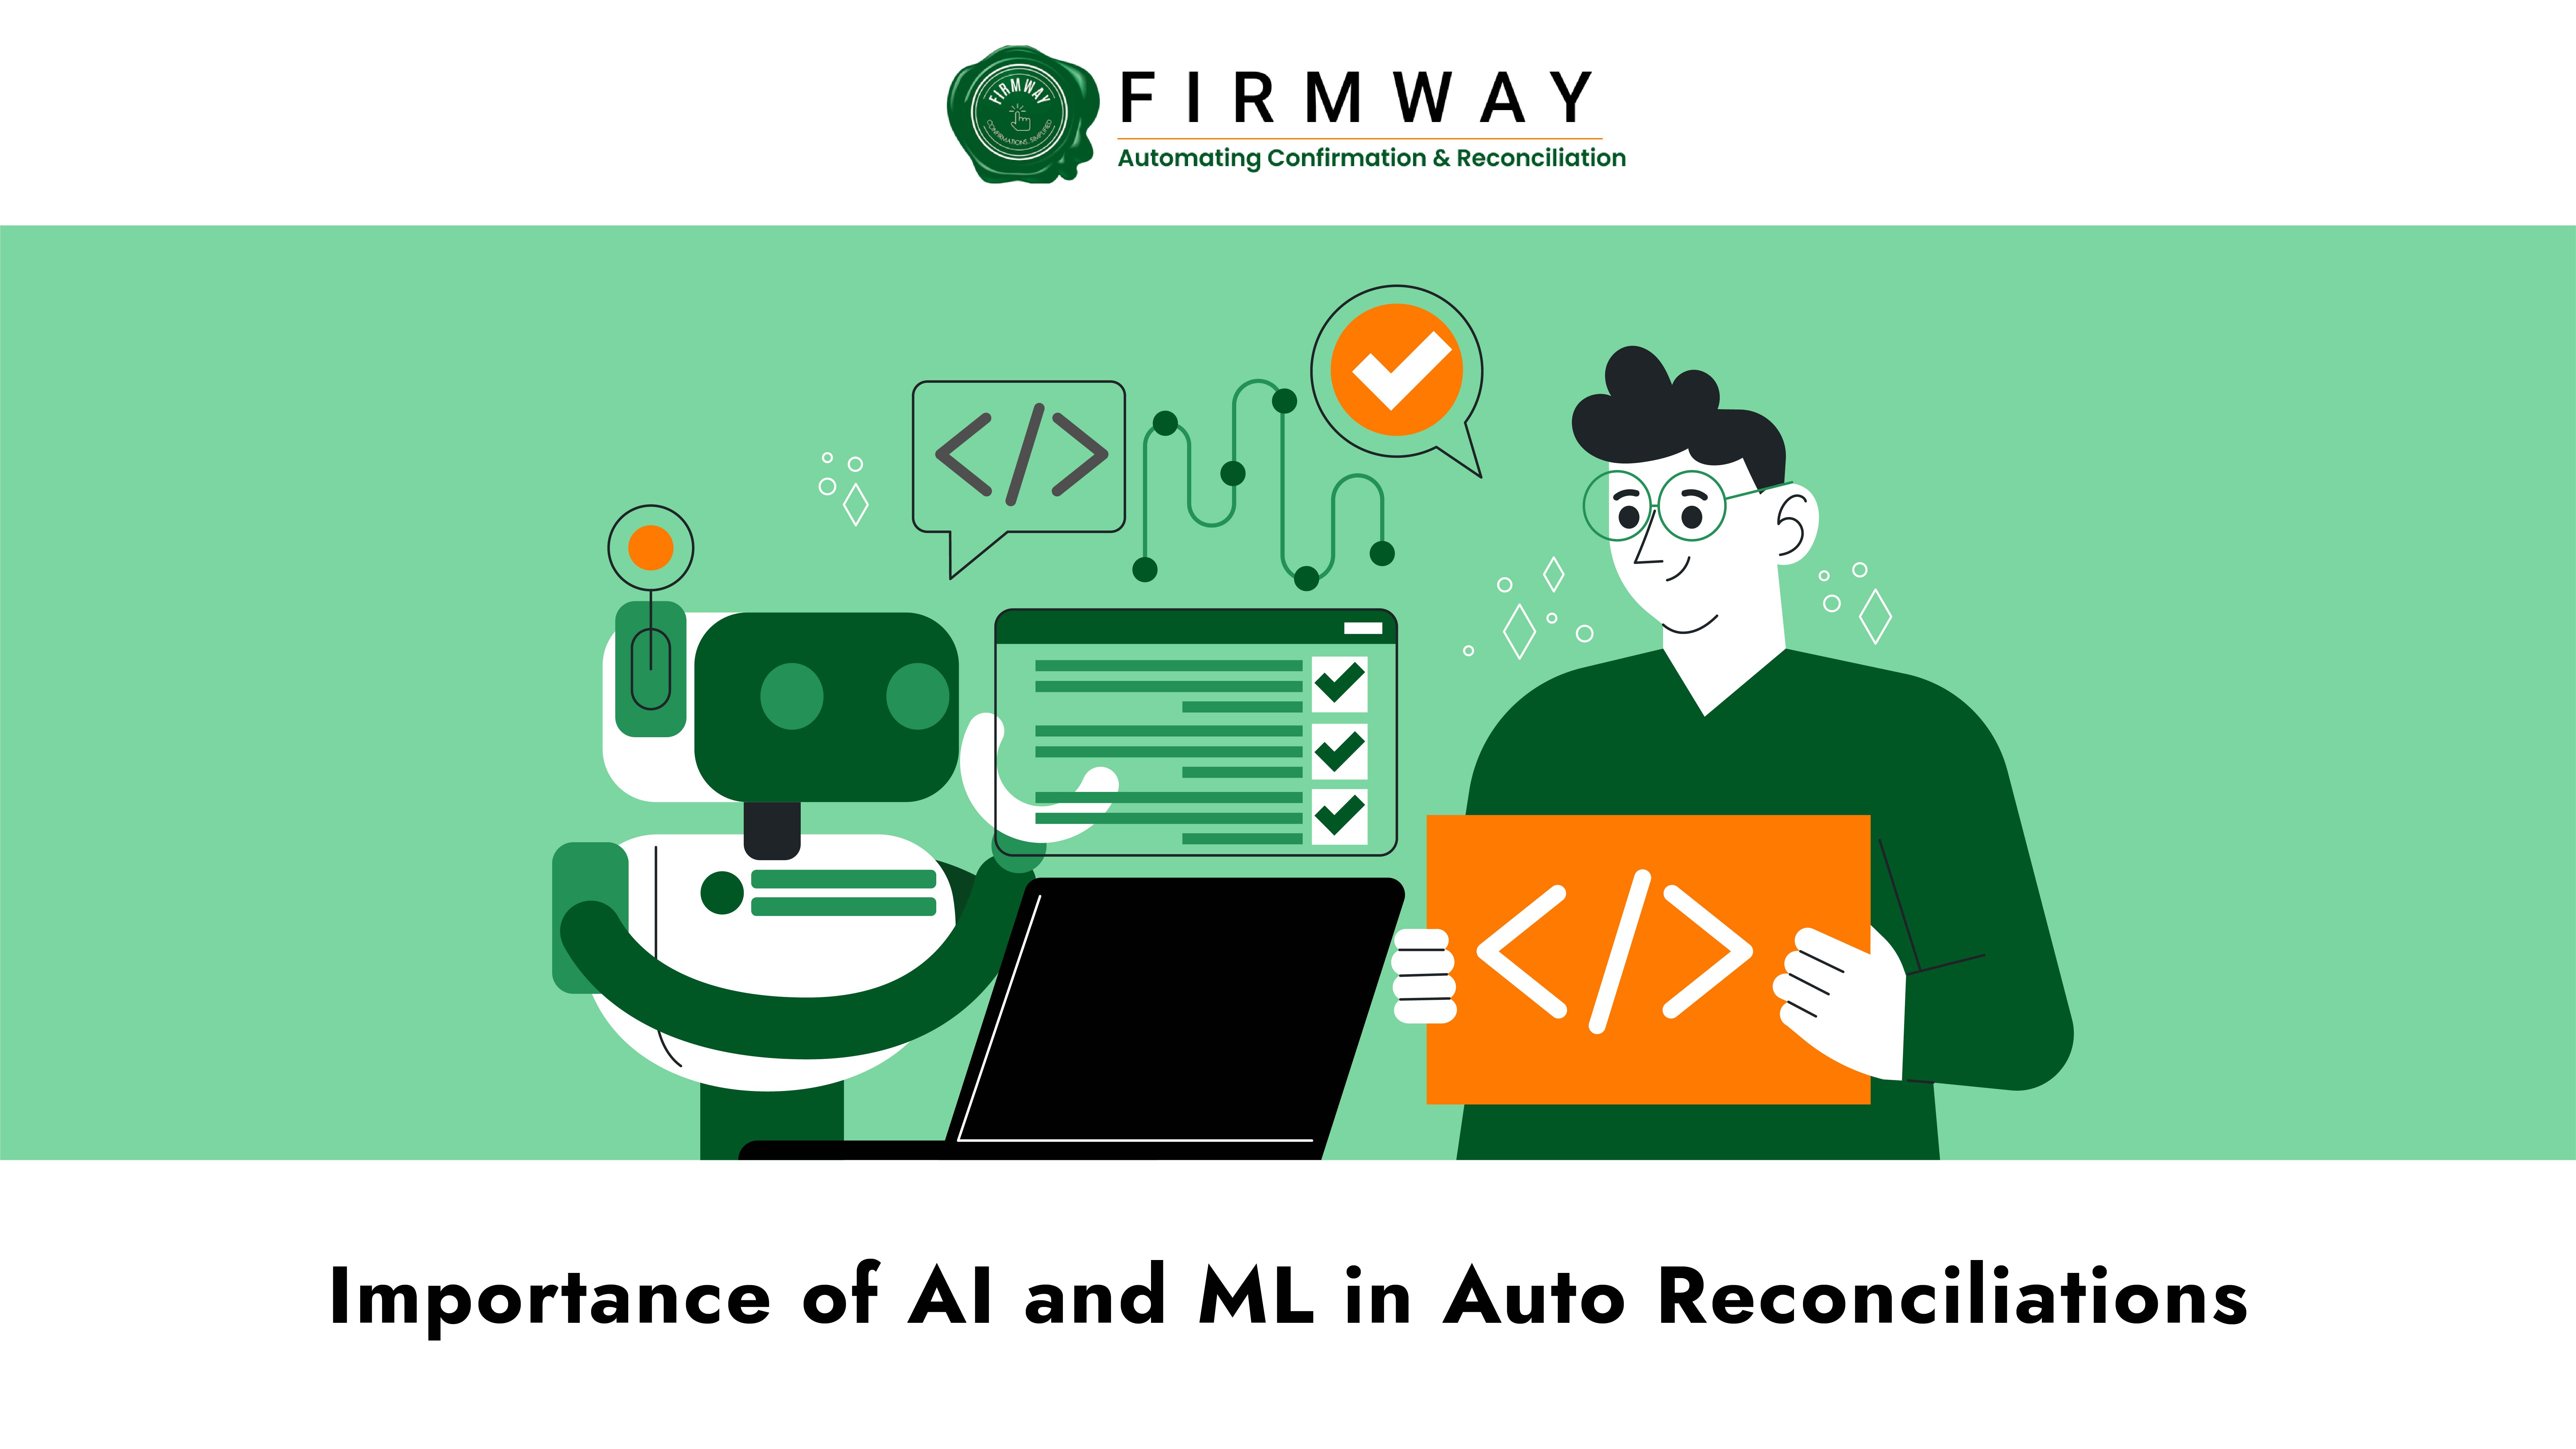 Importance of AL, ML and Automation